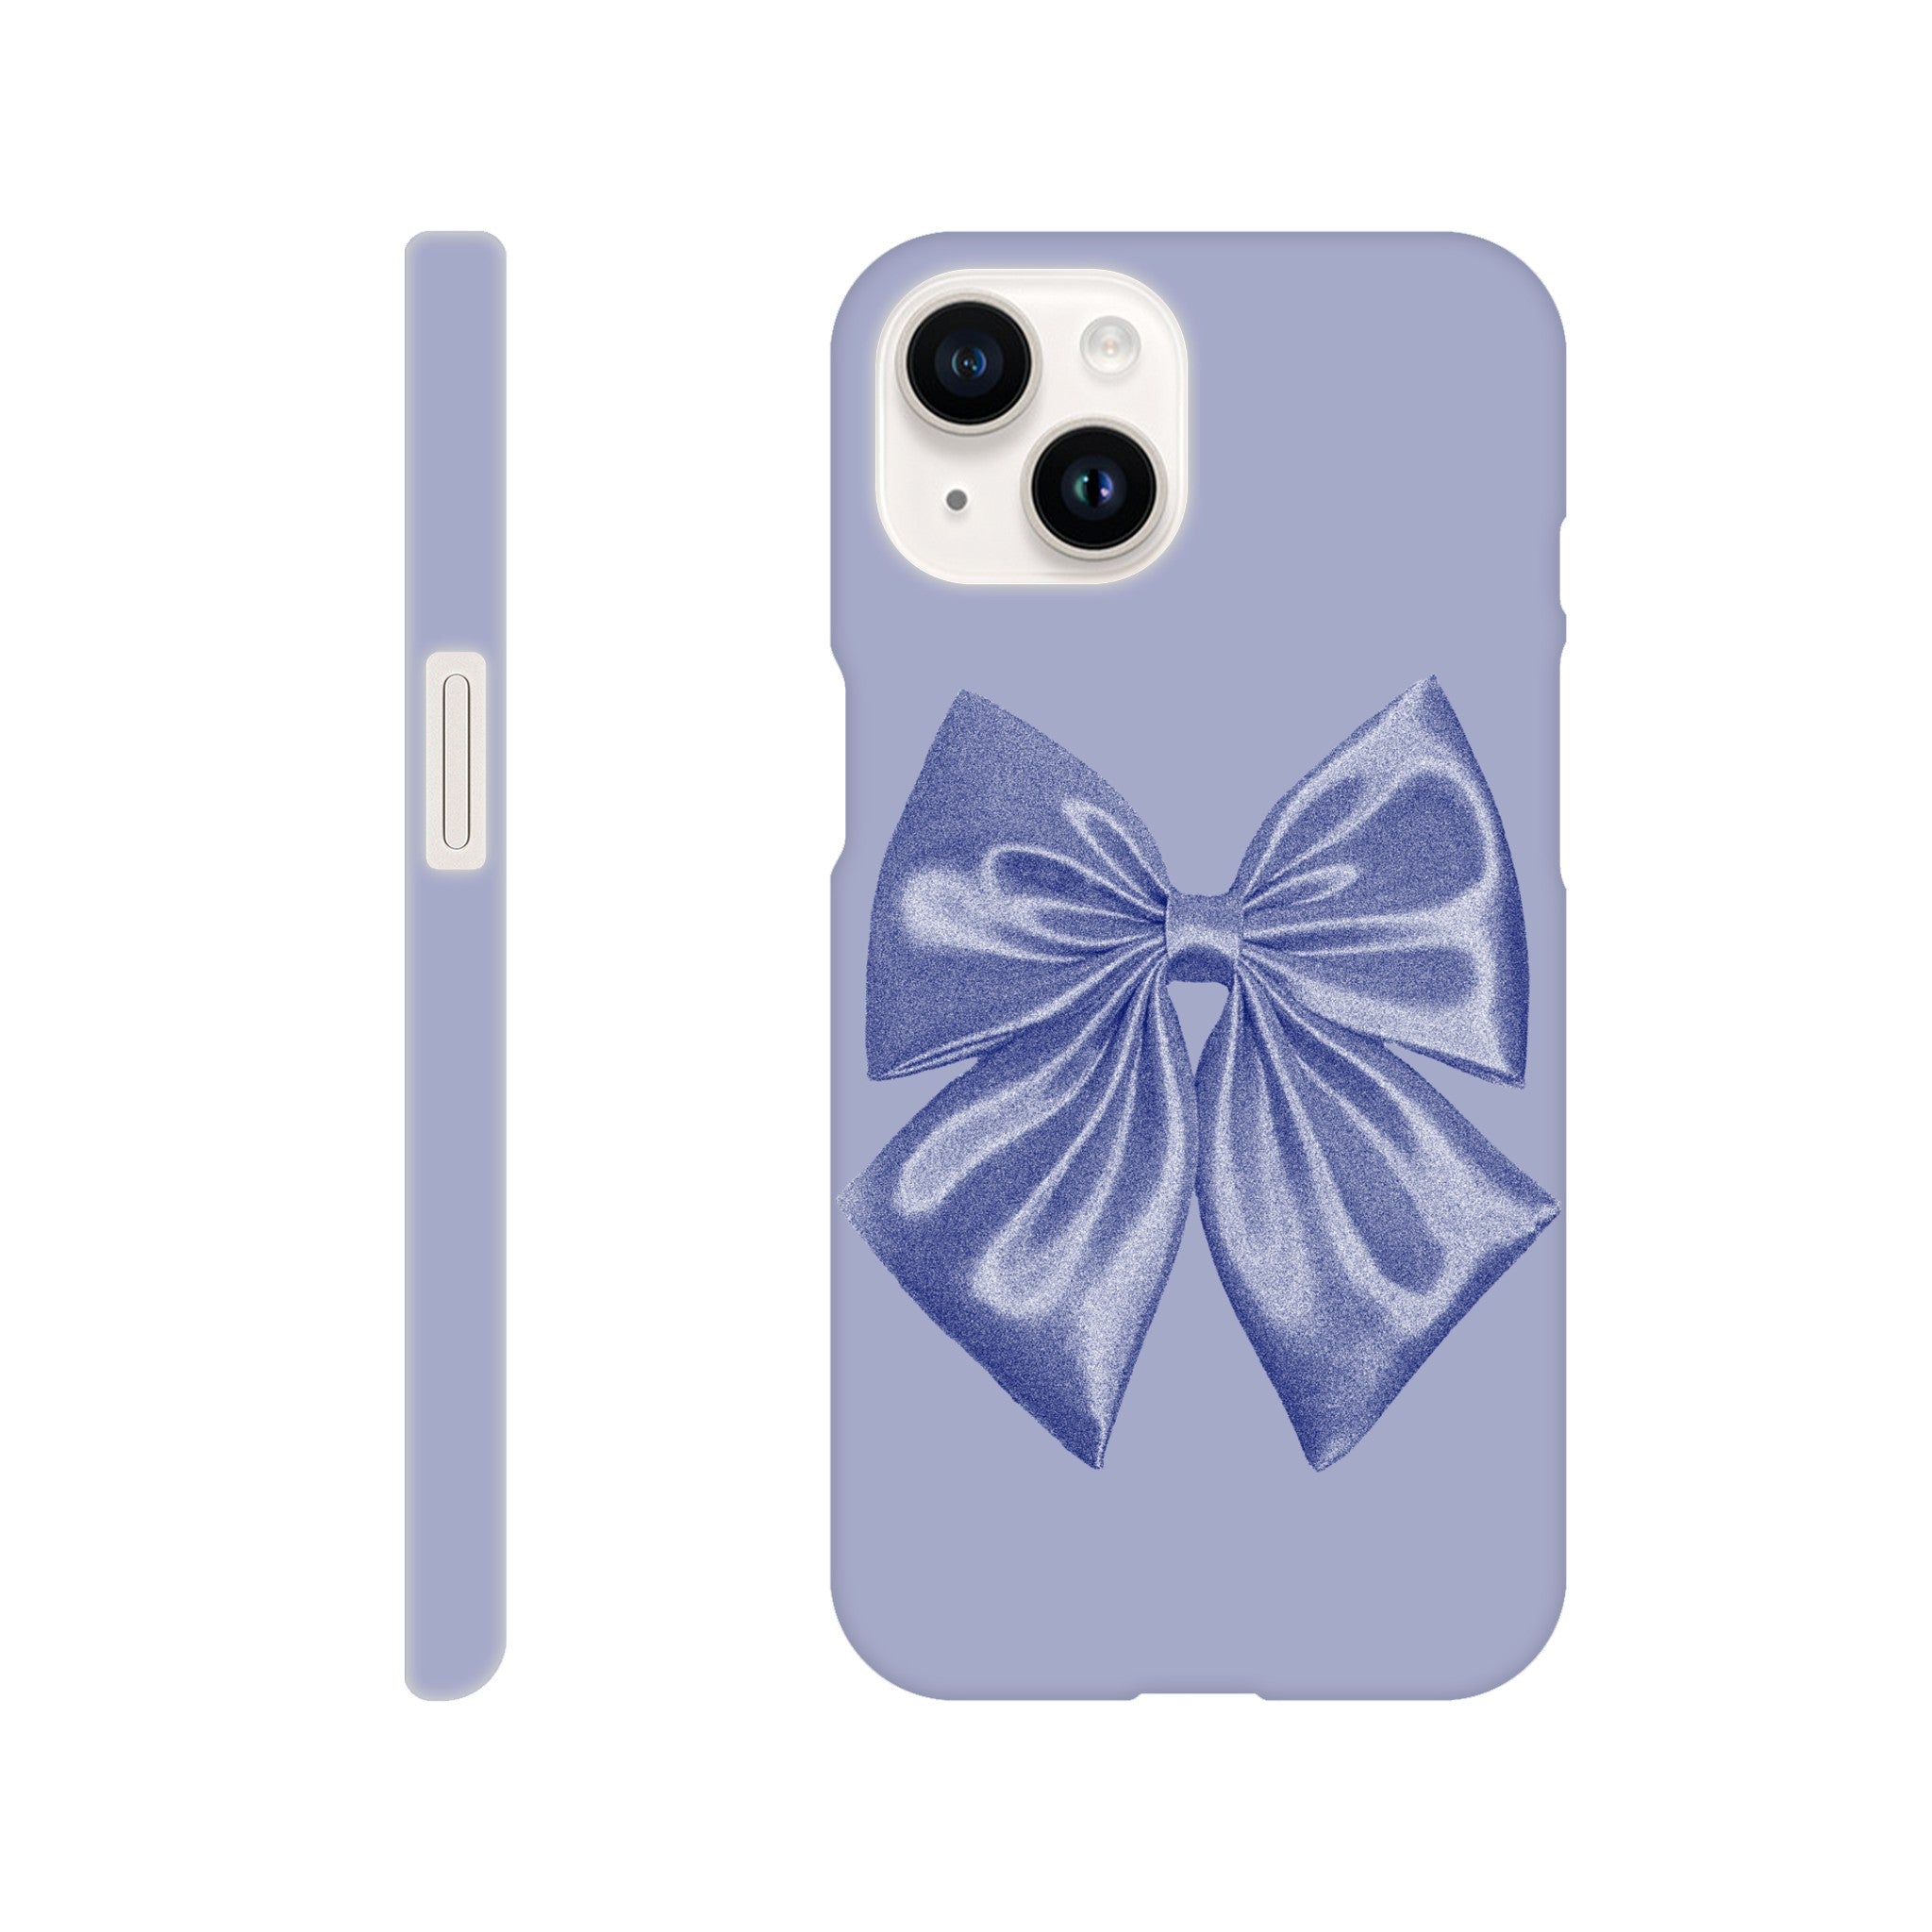 'Wrapped Up' phone case - In Print We Trust